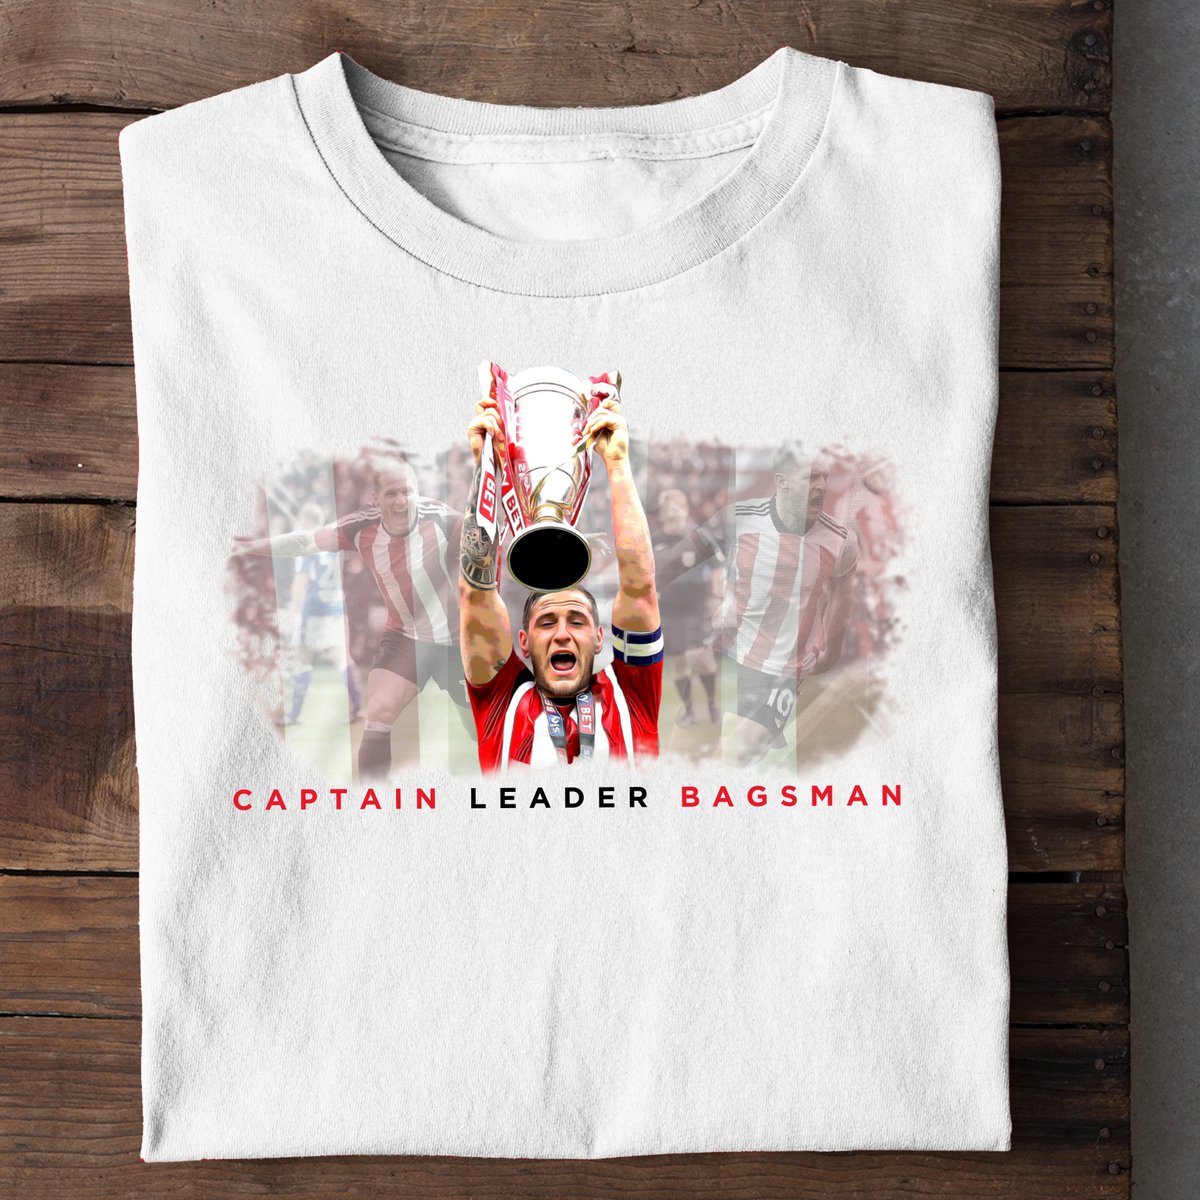 ✅ Available in sizes up to 5XL. 🚚 Worldwide shipping. ⭐ Excellent reviews. Shop here 👉 greasychipbutty.app/shop/product/c… #SUFC